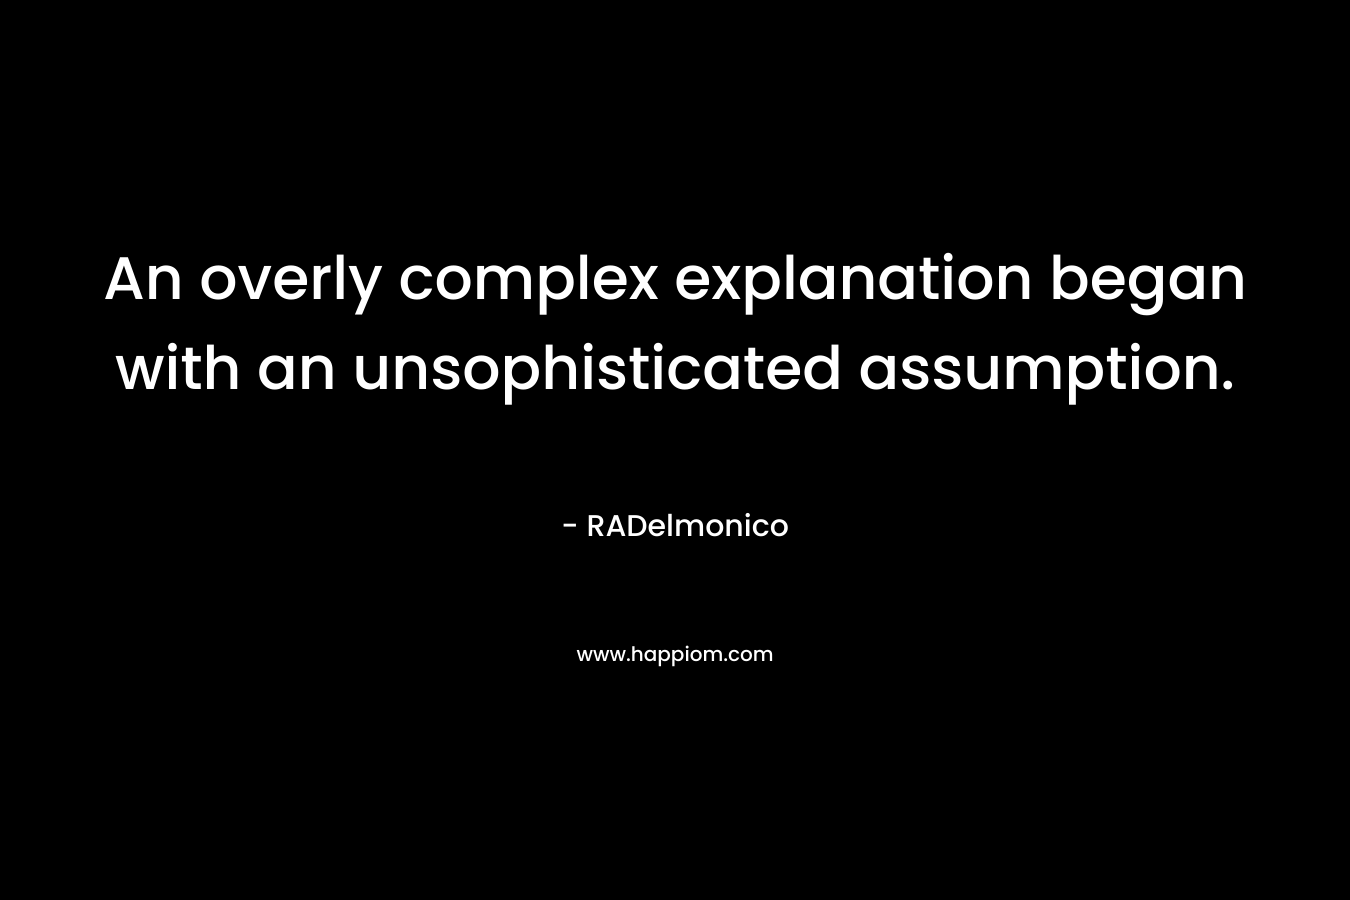 An overly complex explanation began with an unsophisticated assumption.